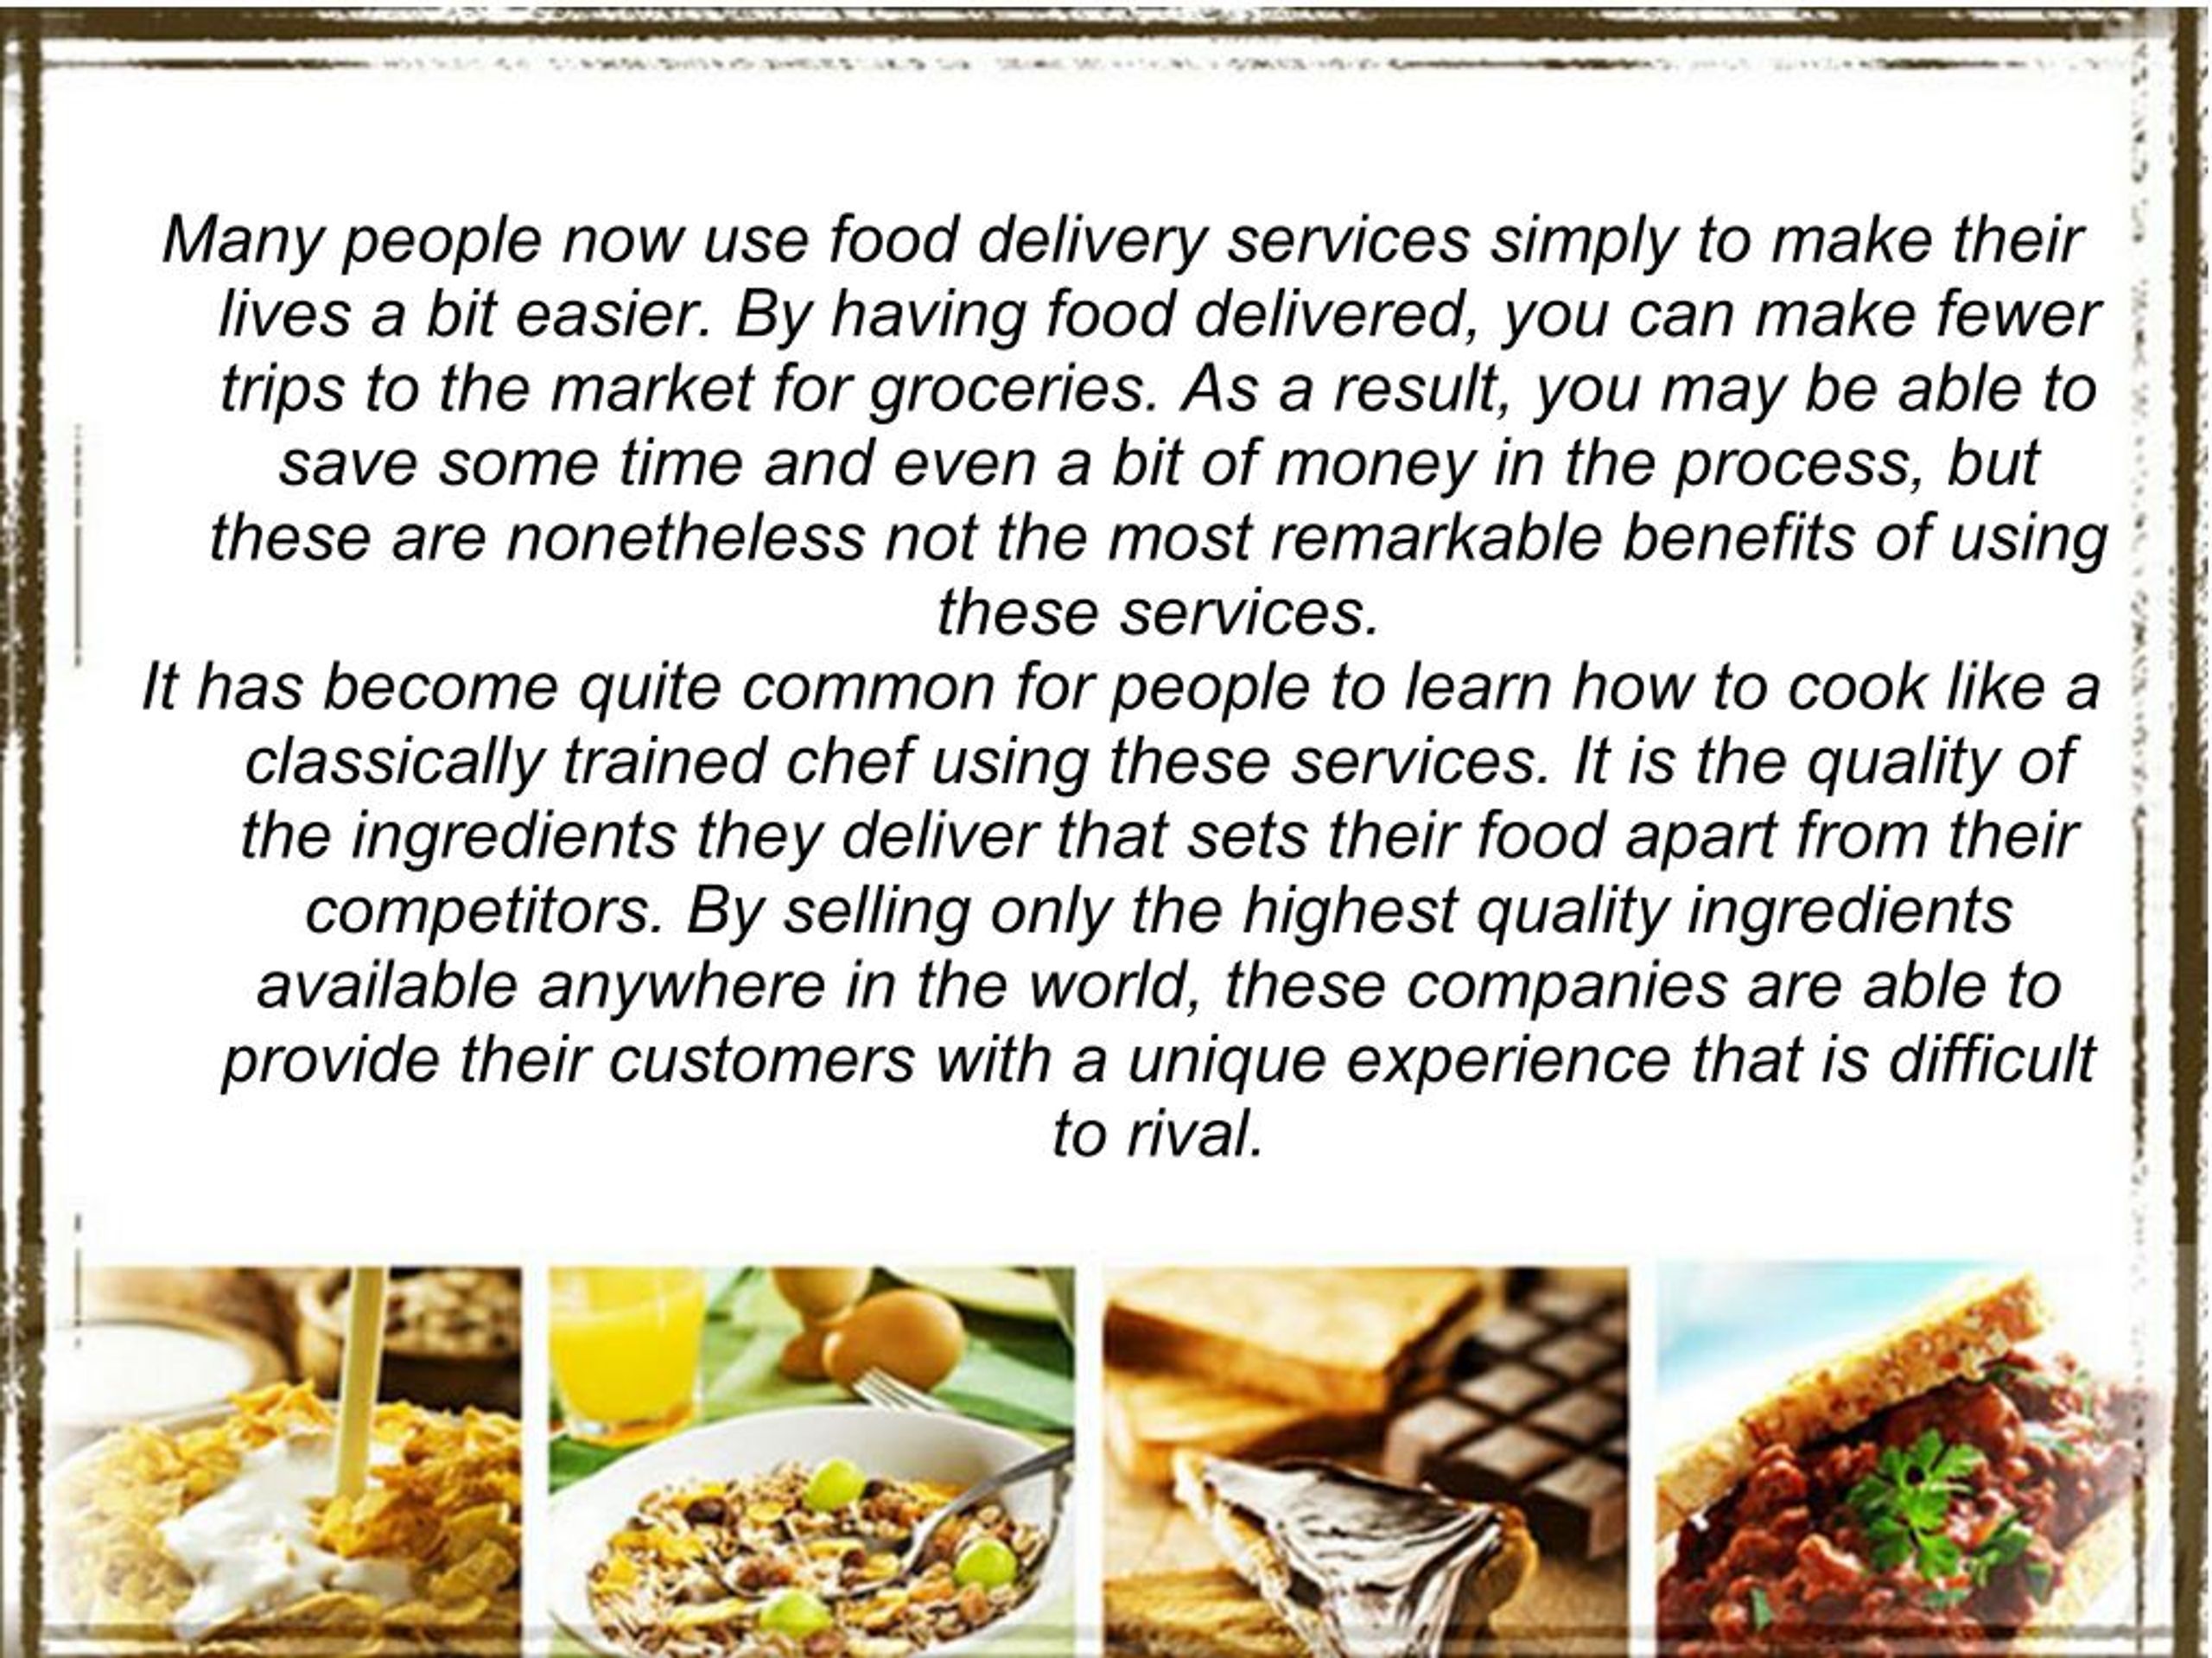 research on food delivery services